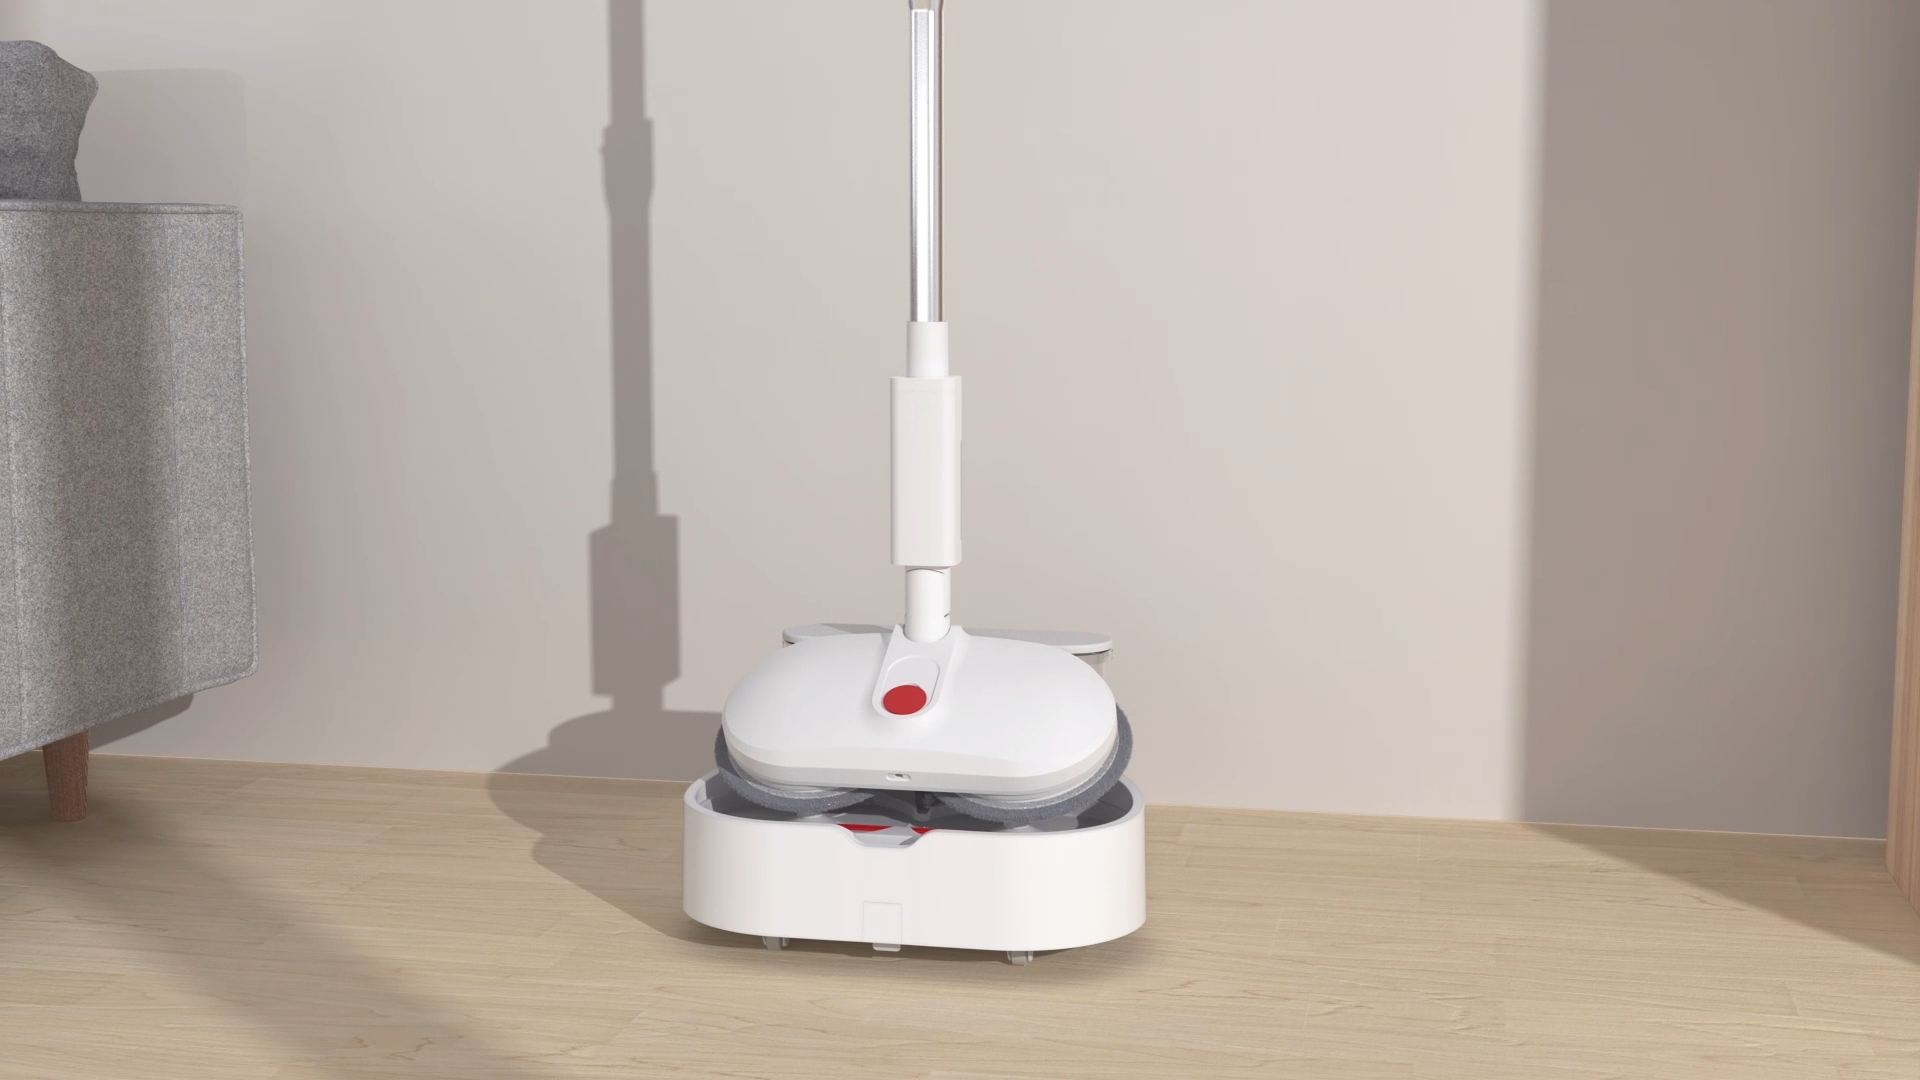 Duspin5 pro Cordless Spin Mop Cleaner Product Film